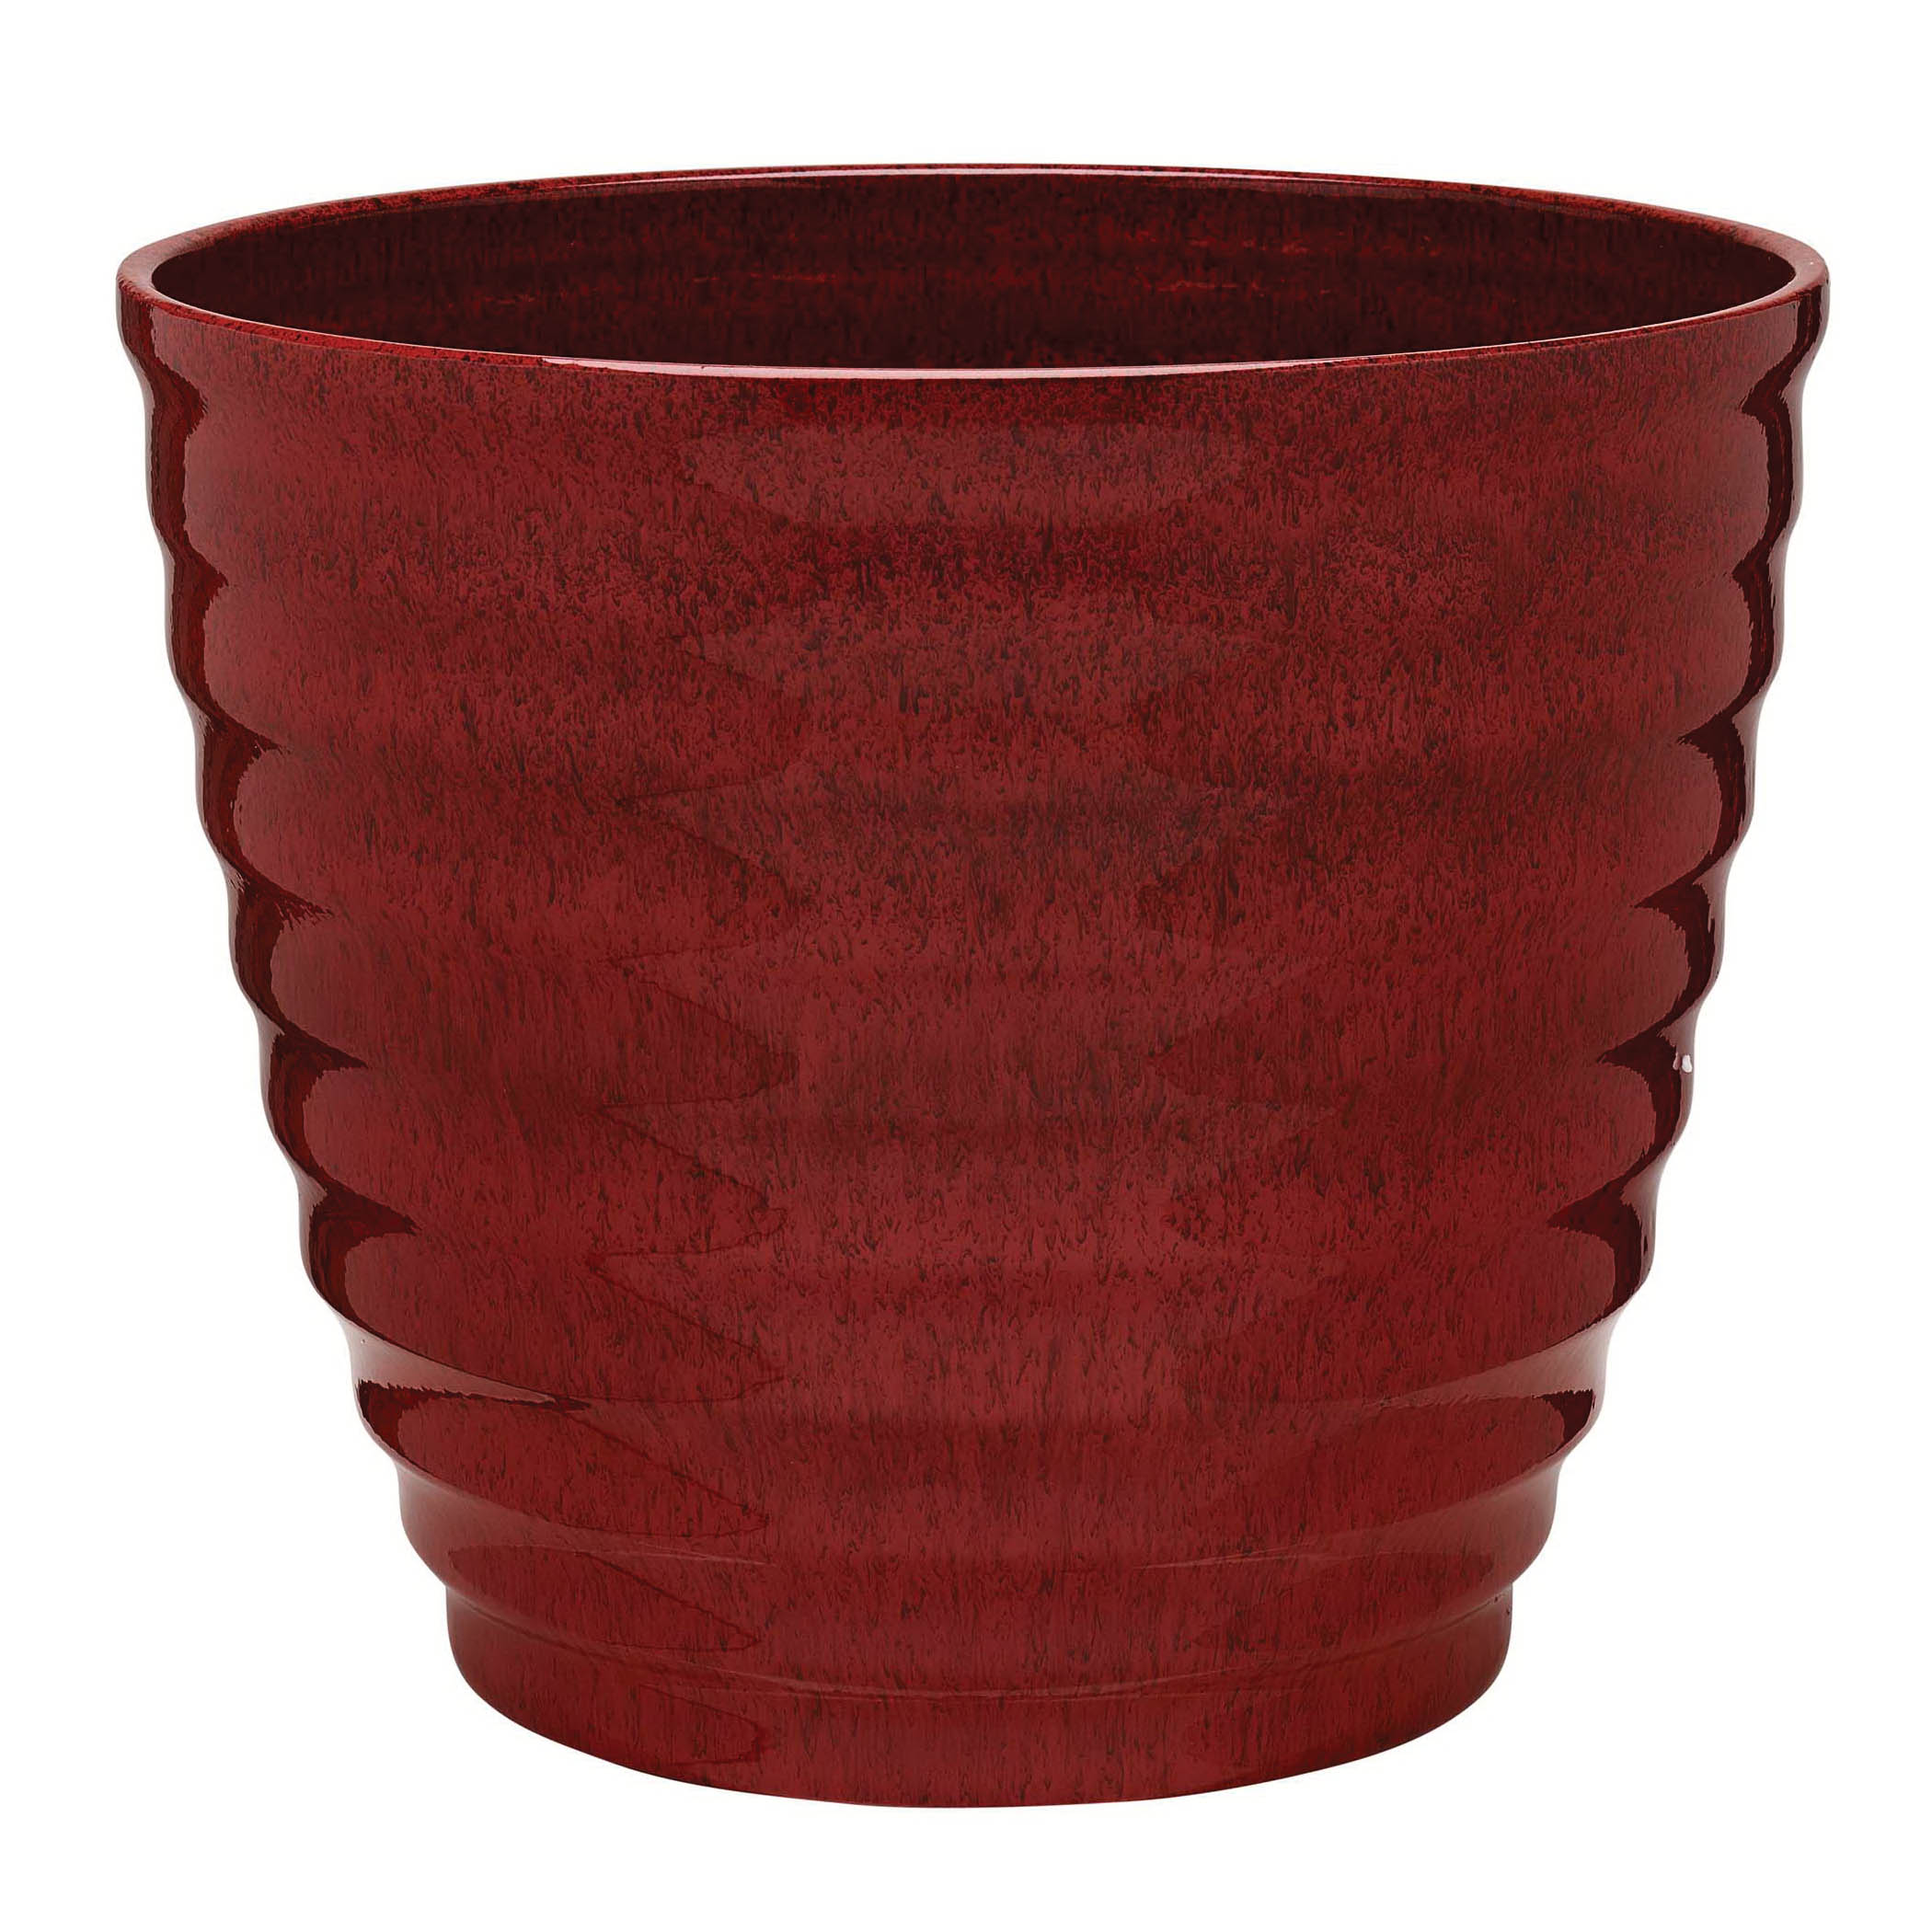 HDR-064749 Planter, 14 in Dia, Round, Beehive Design, Resin, Red